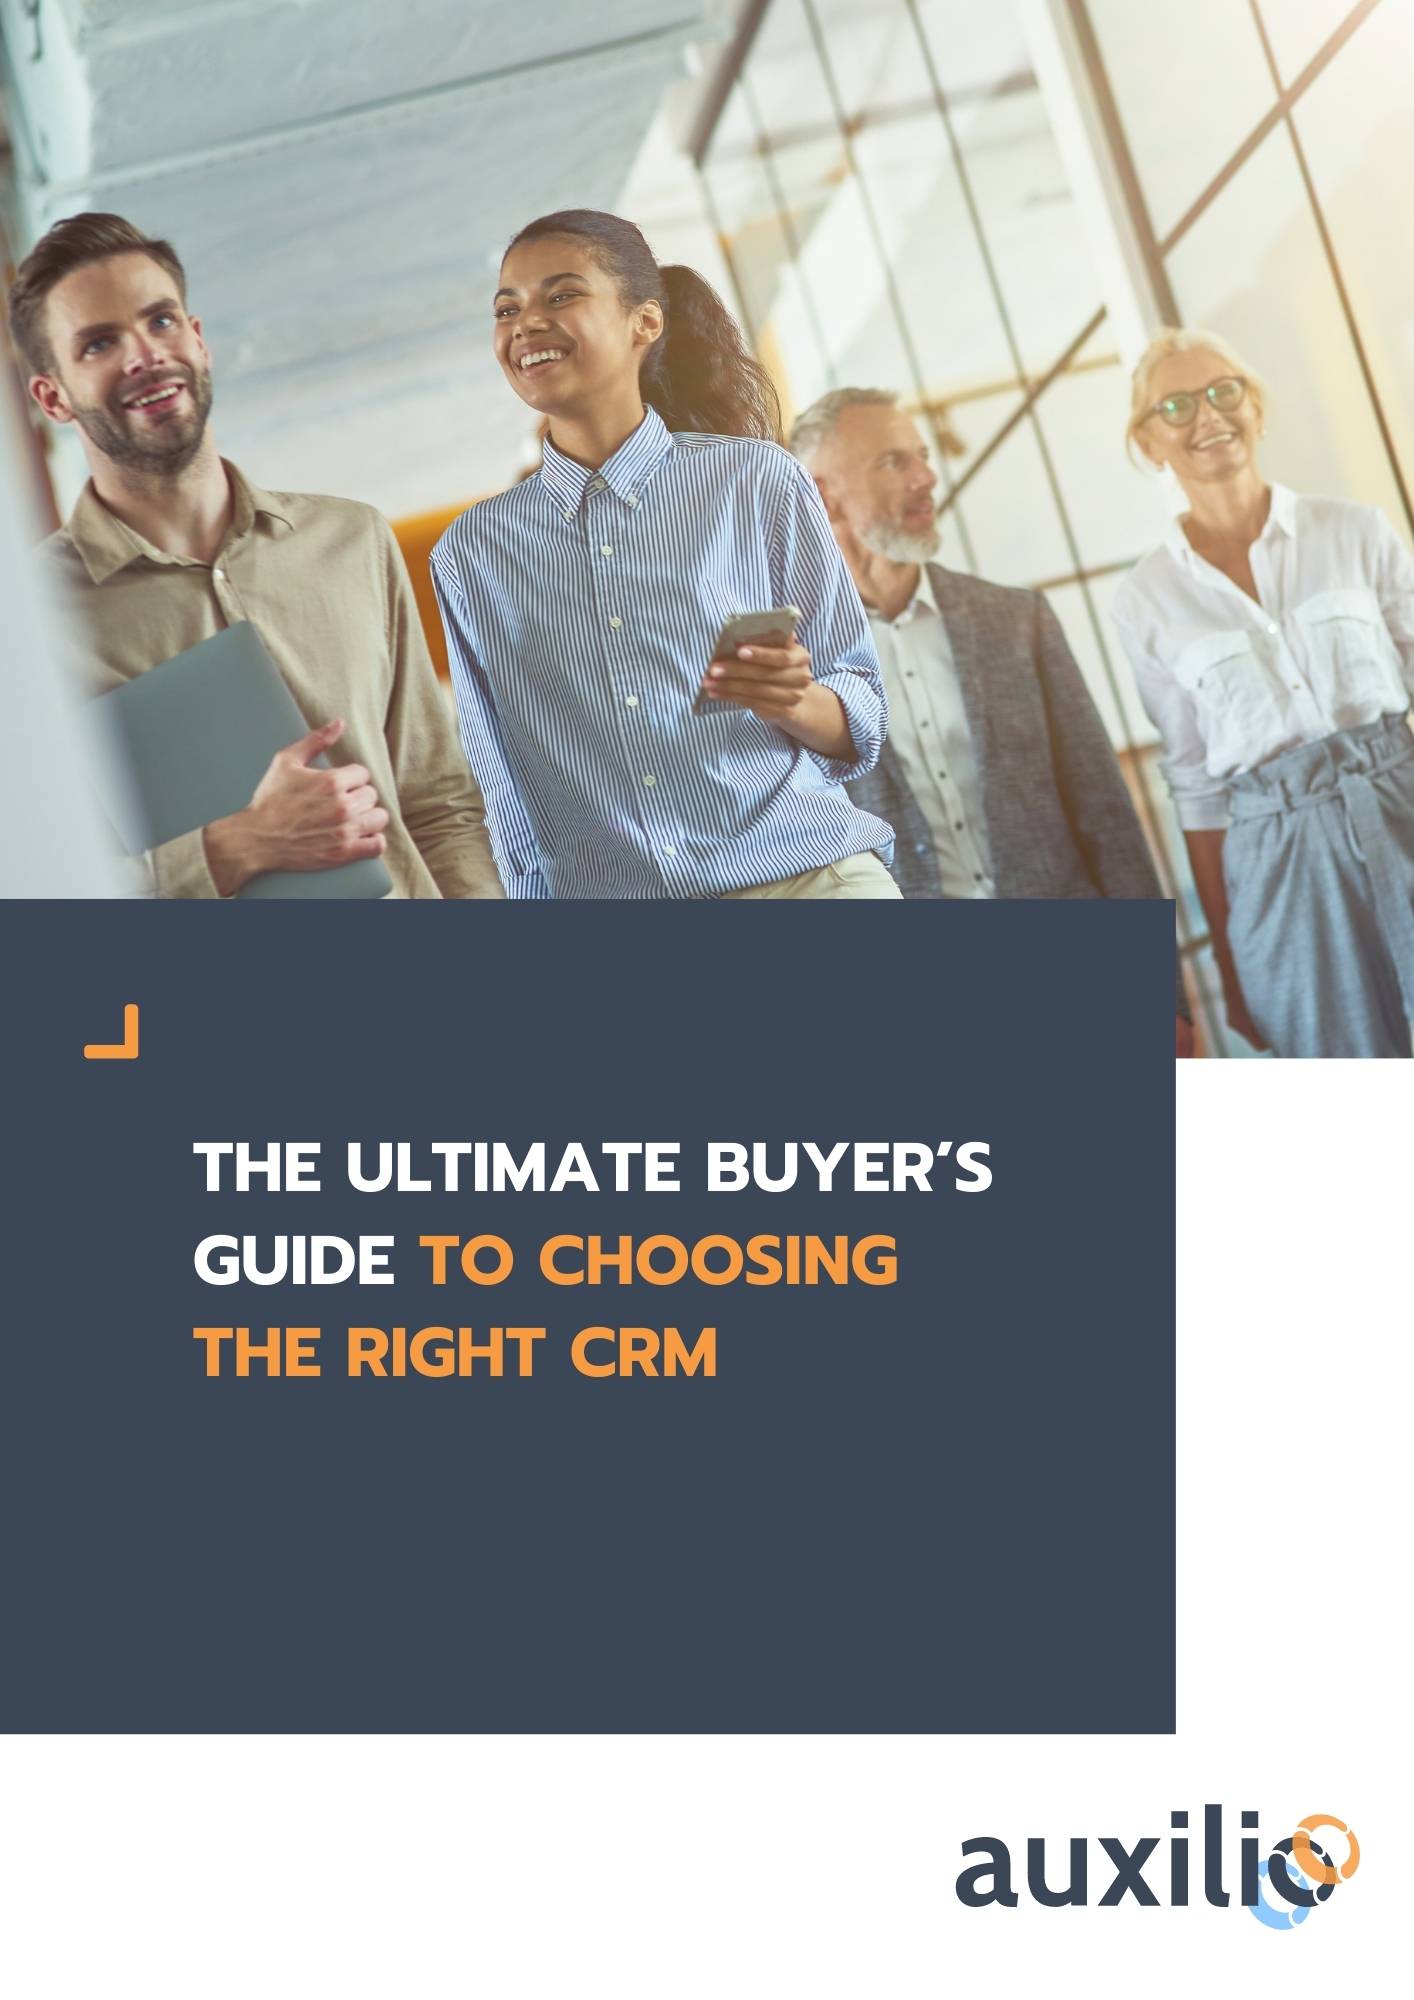 THE ULTIMATE BUYER'S GUIDE TO CHOOSING THE RIGHT CRM